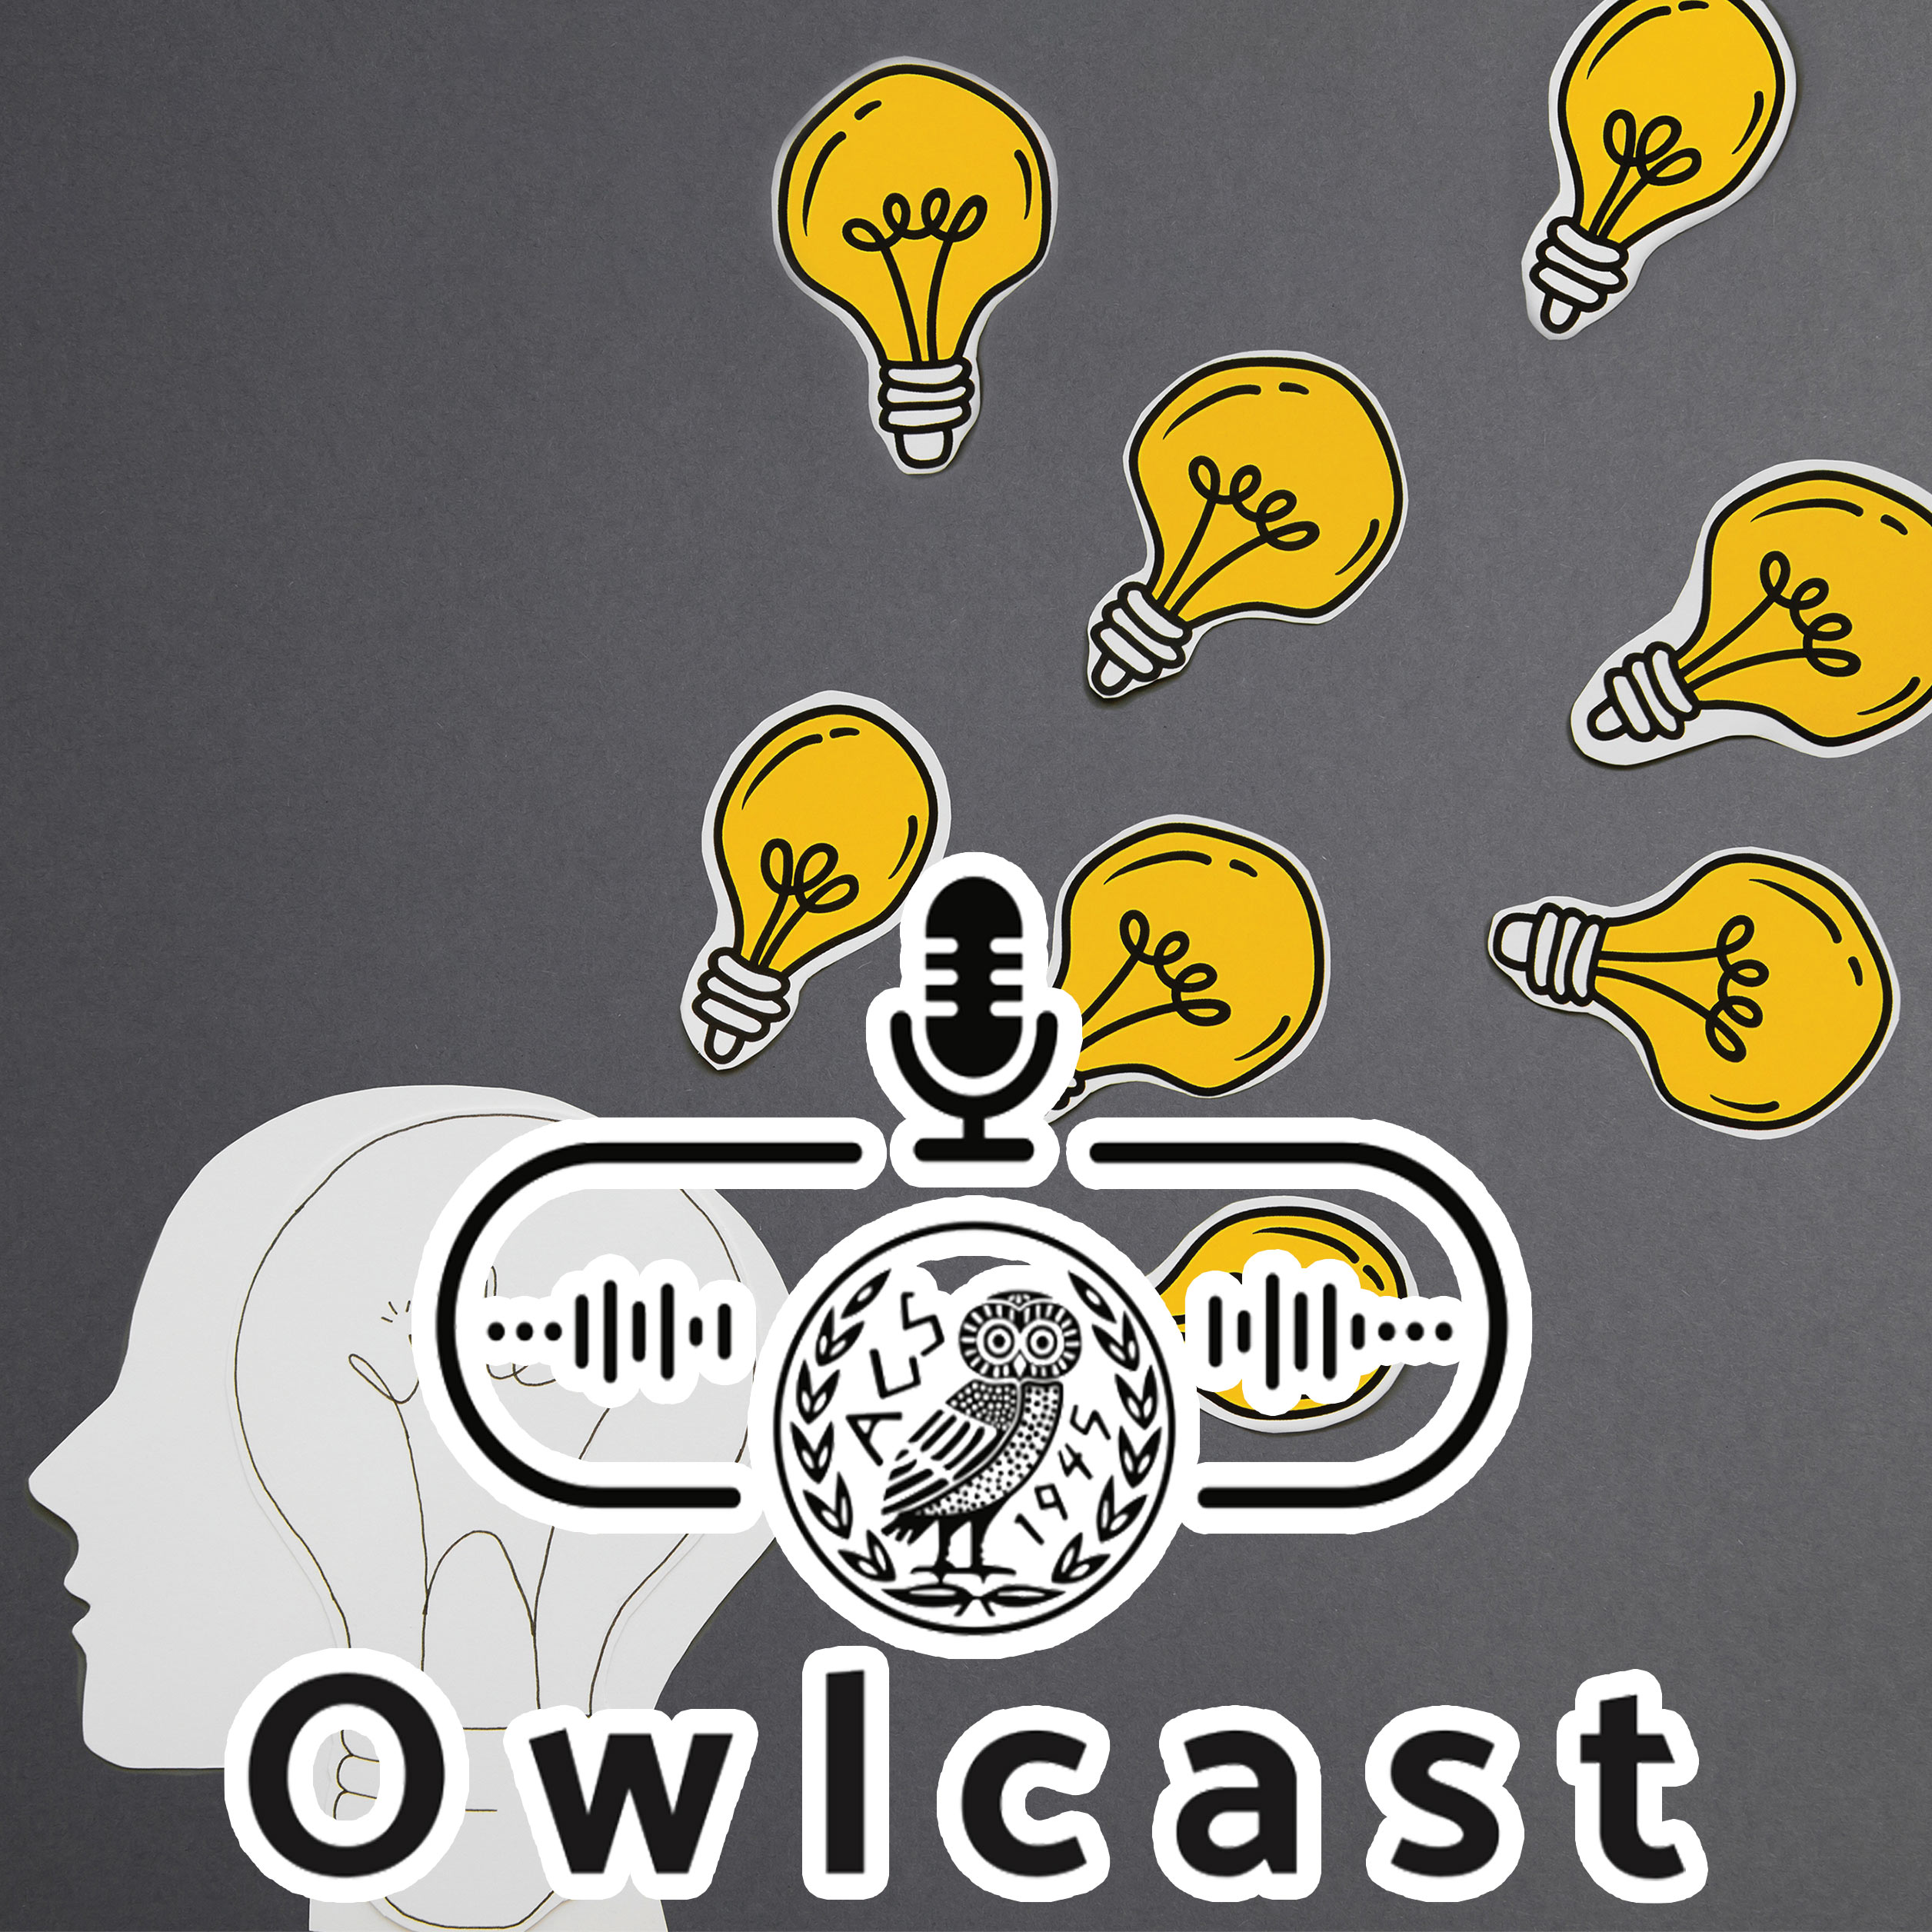 Owlcast 88 - ACS Athens OPEN: turning dreams into reality